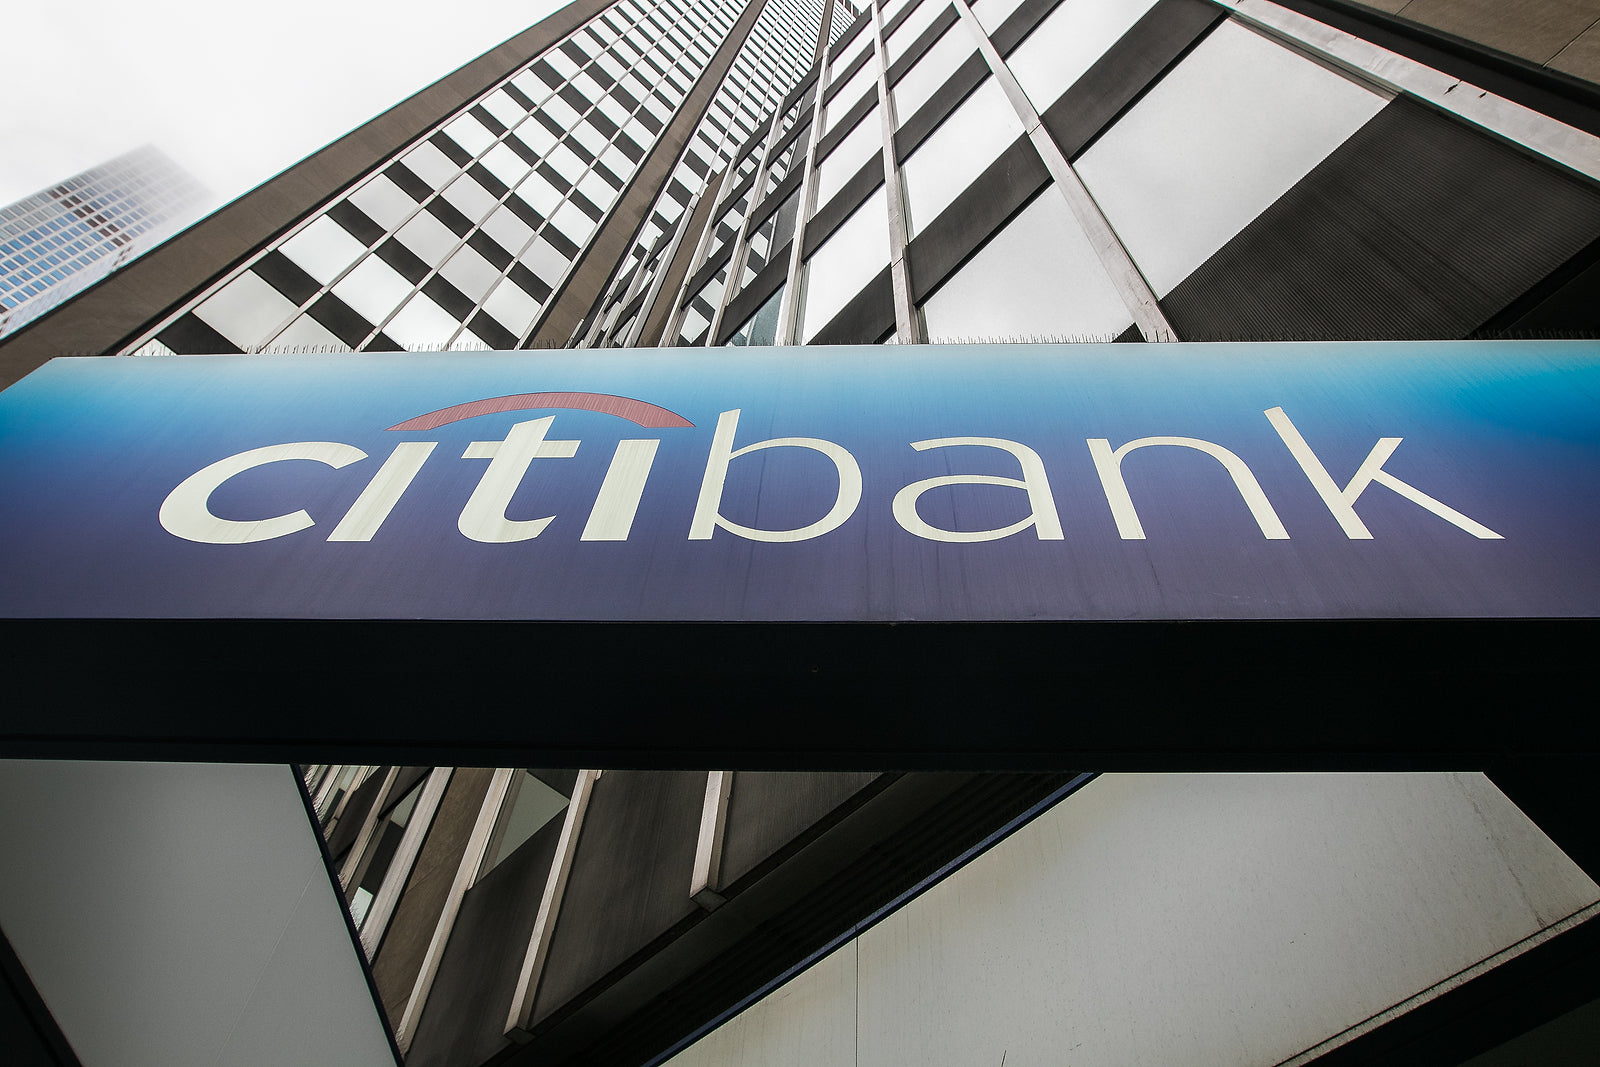 [US] Citibank sued by New York after failing to reimburse fraud victims